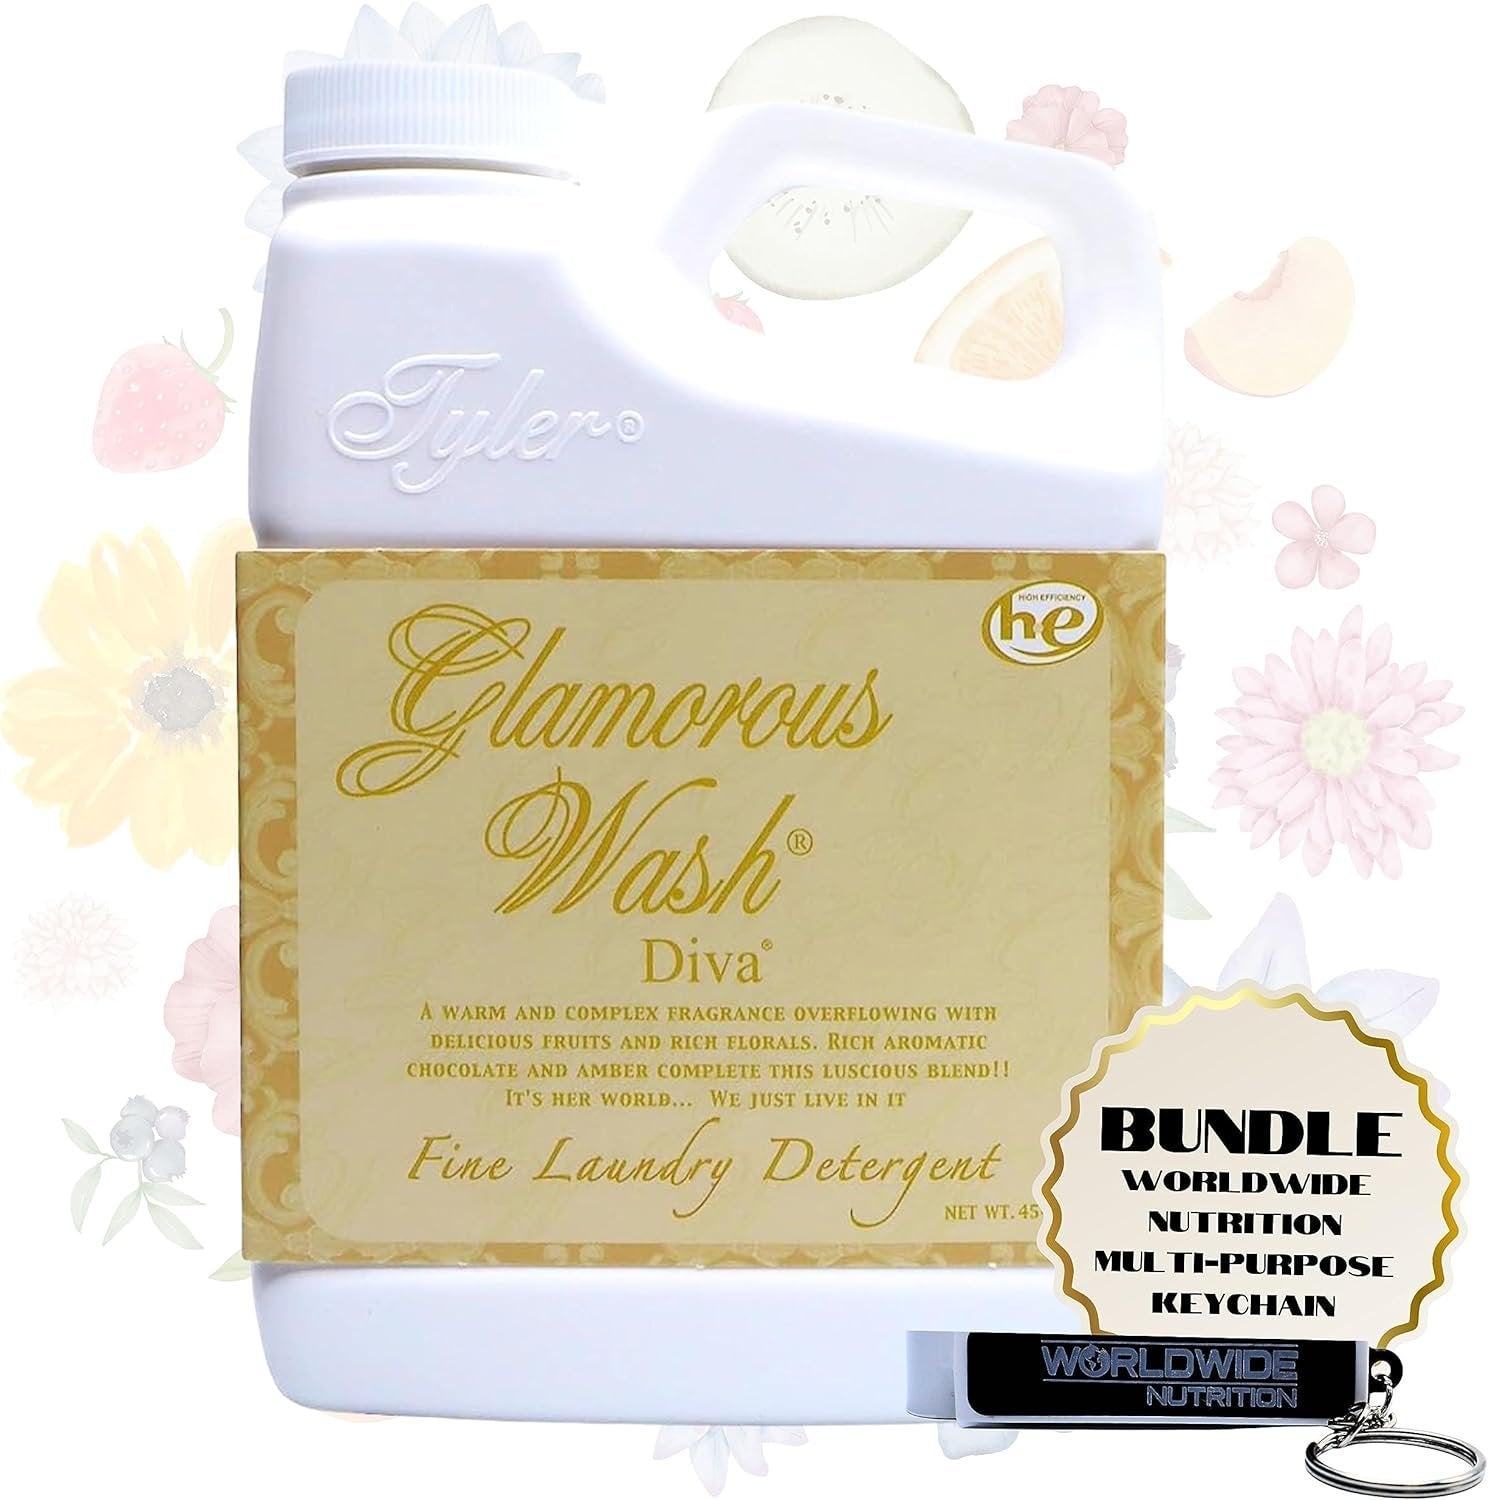 Tyler Candle Company Glamorous Wash Diva Laundry Liquid Detergent - Hand and Machine Washable - 16 oz (454 grams) - Pack of 1 with Multi-Purpose Keychain